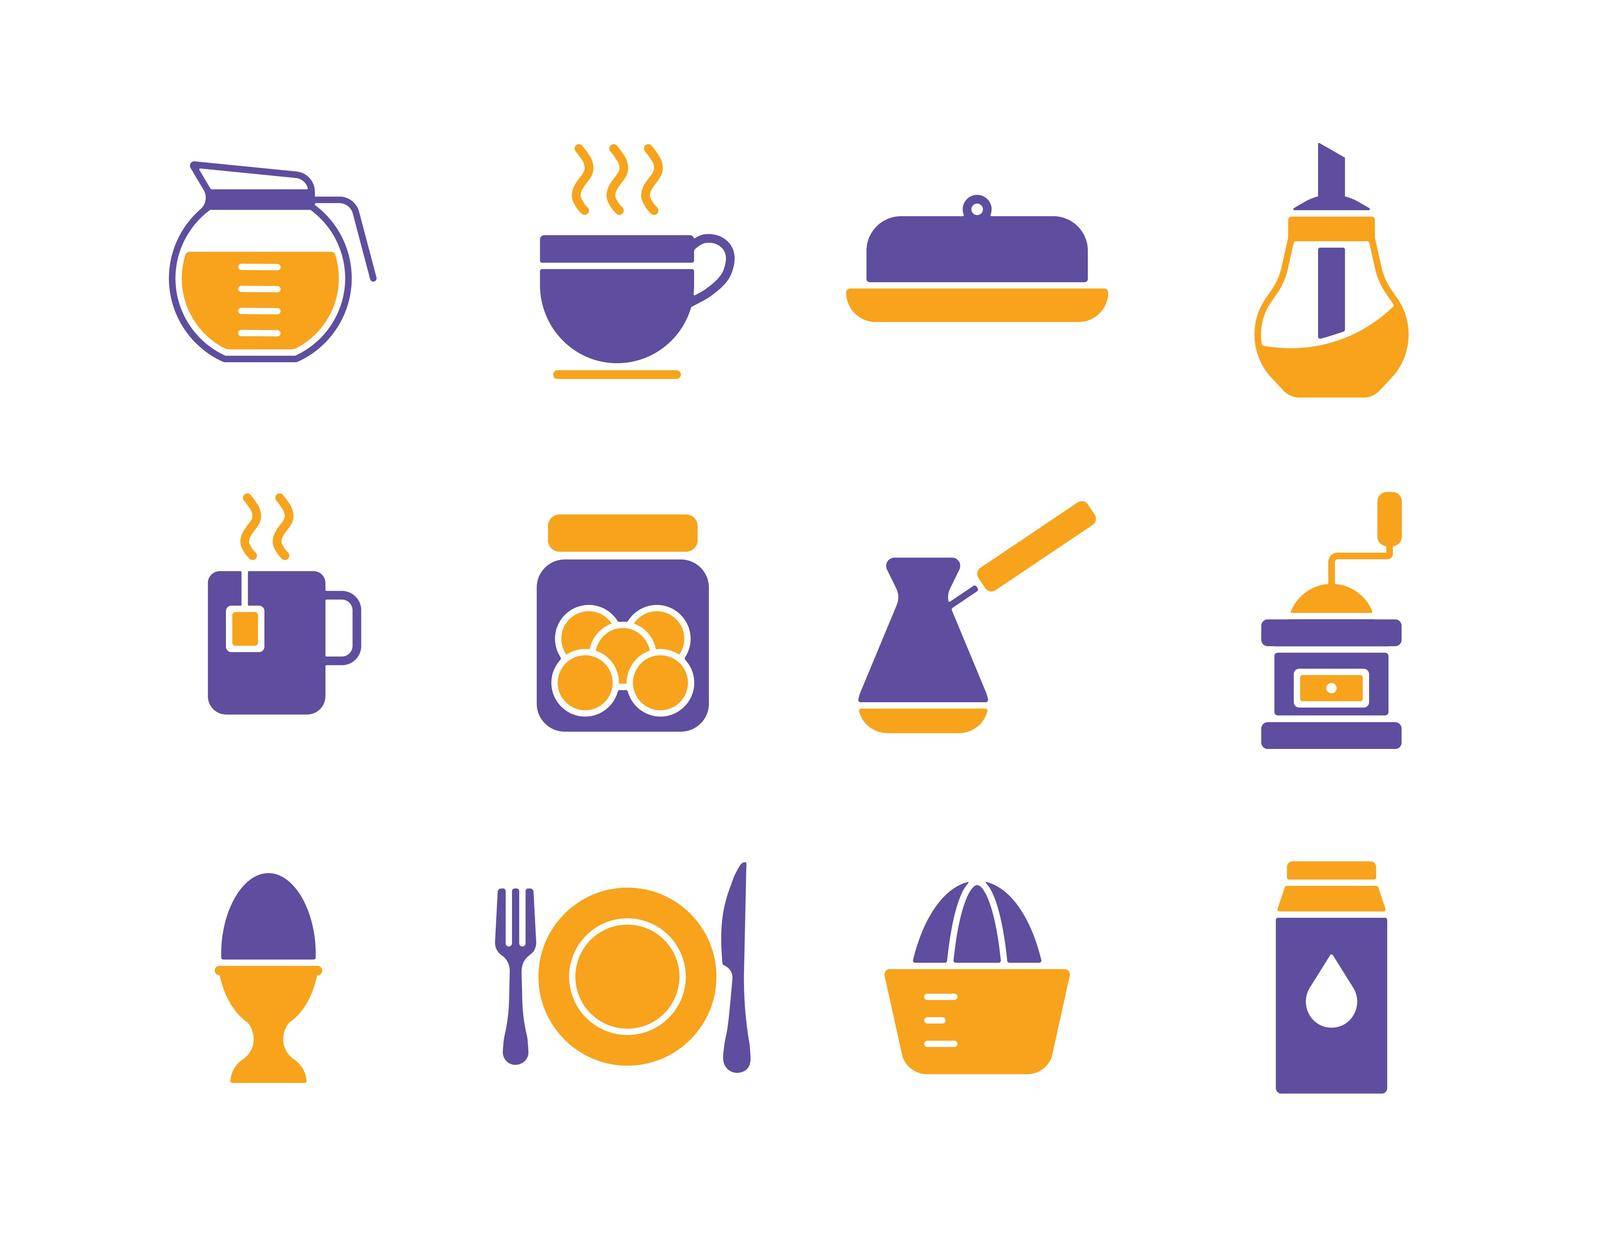 Breakfast and kitchen vector icon glyph set. Graph symbol for cooking web site and apps design, logo, app, UI